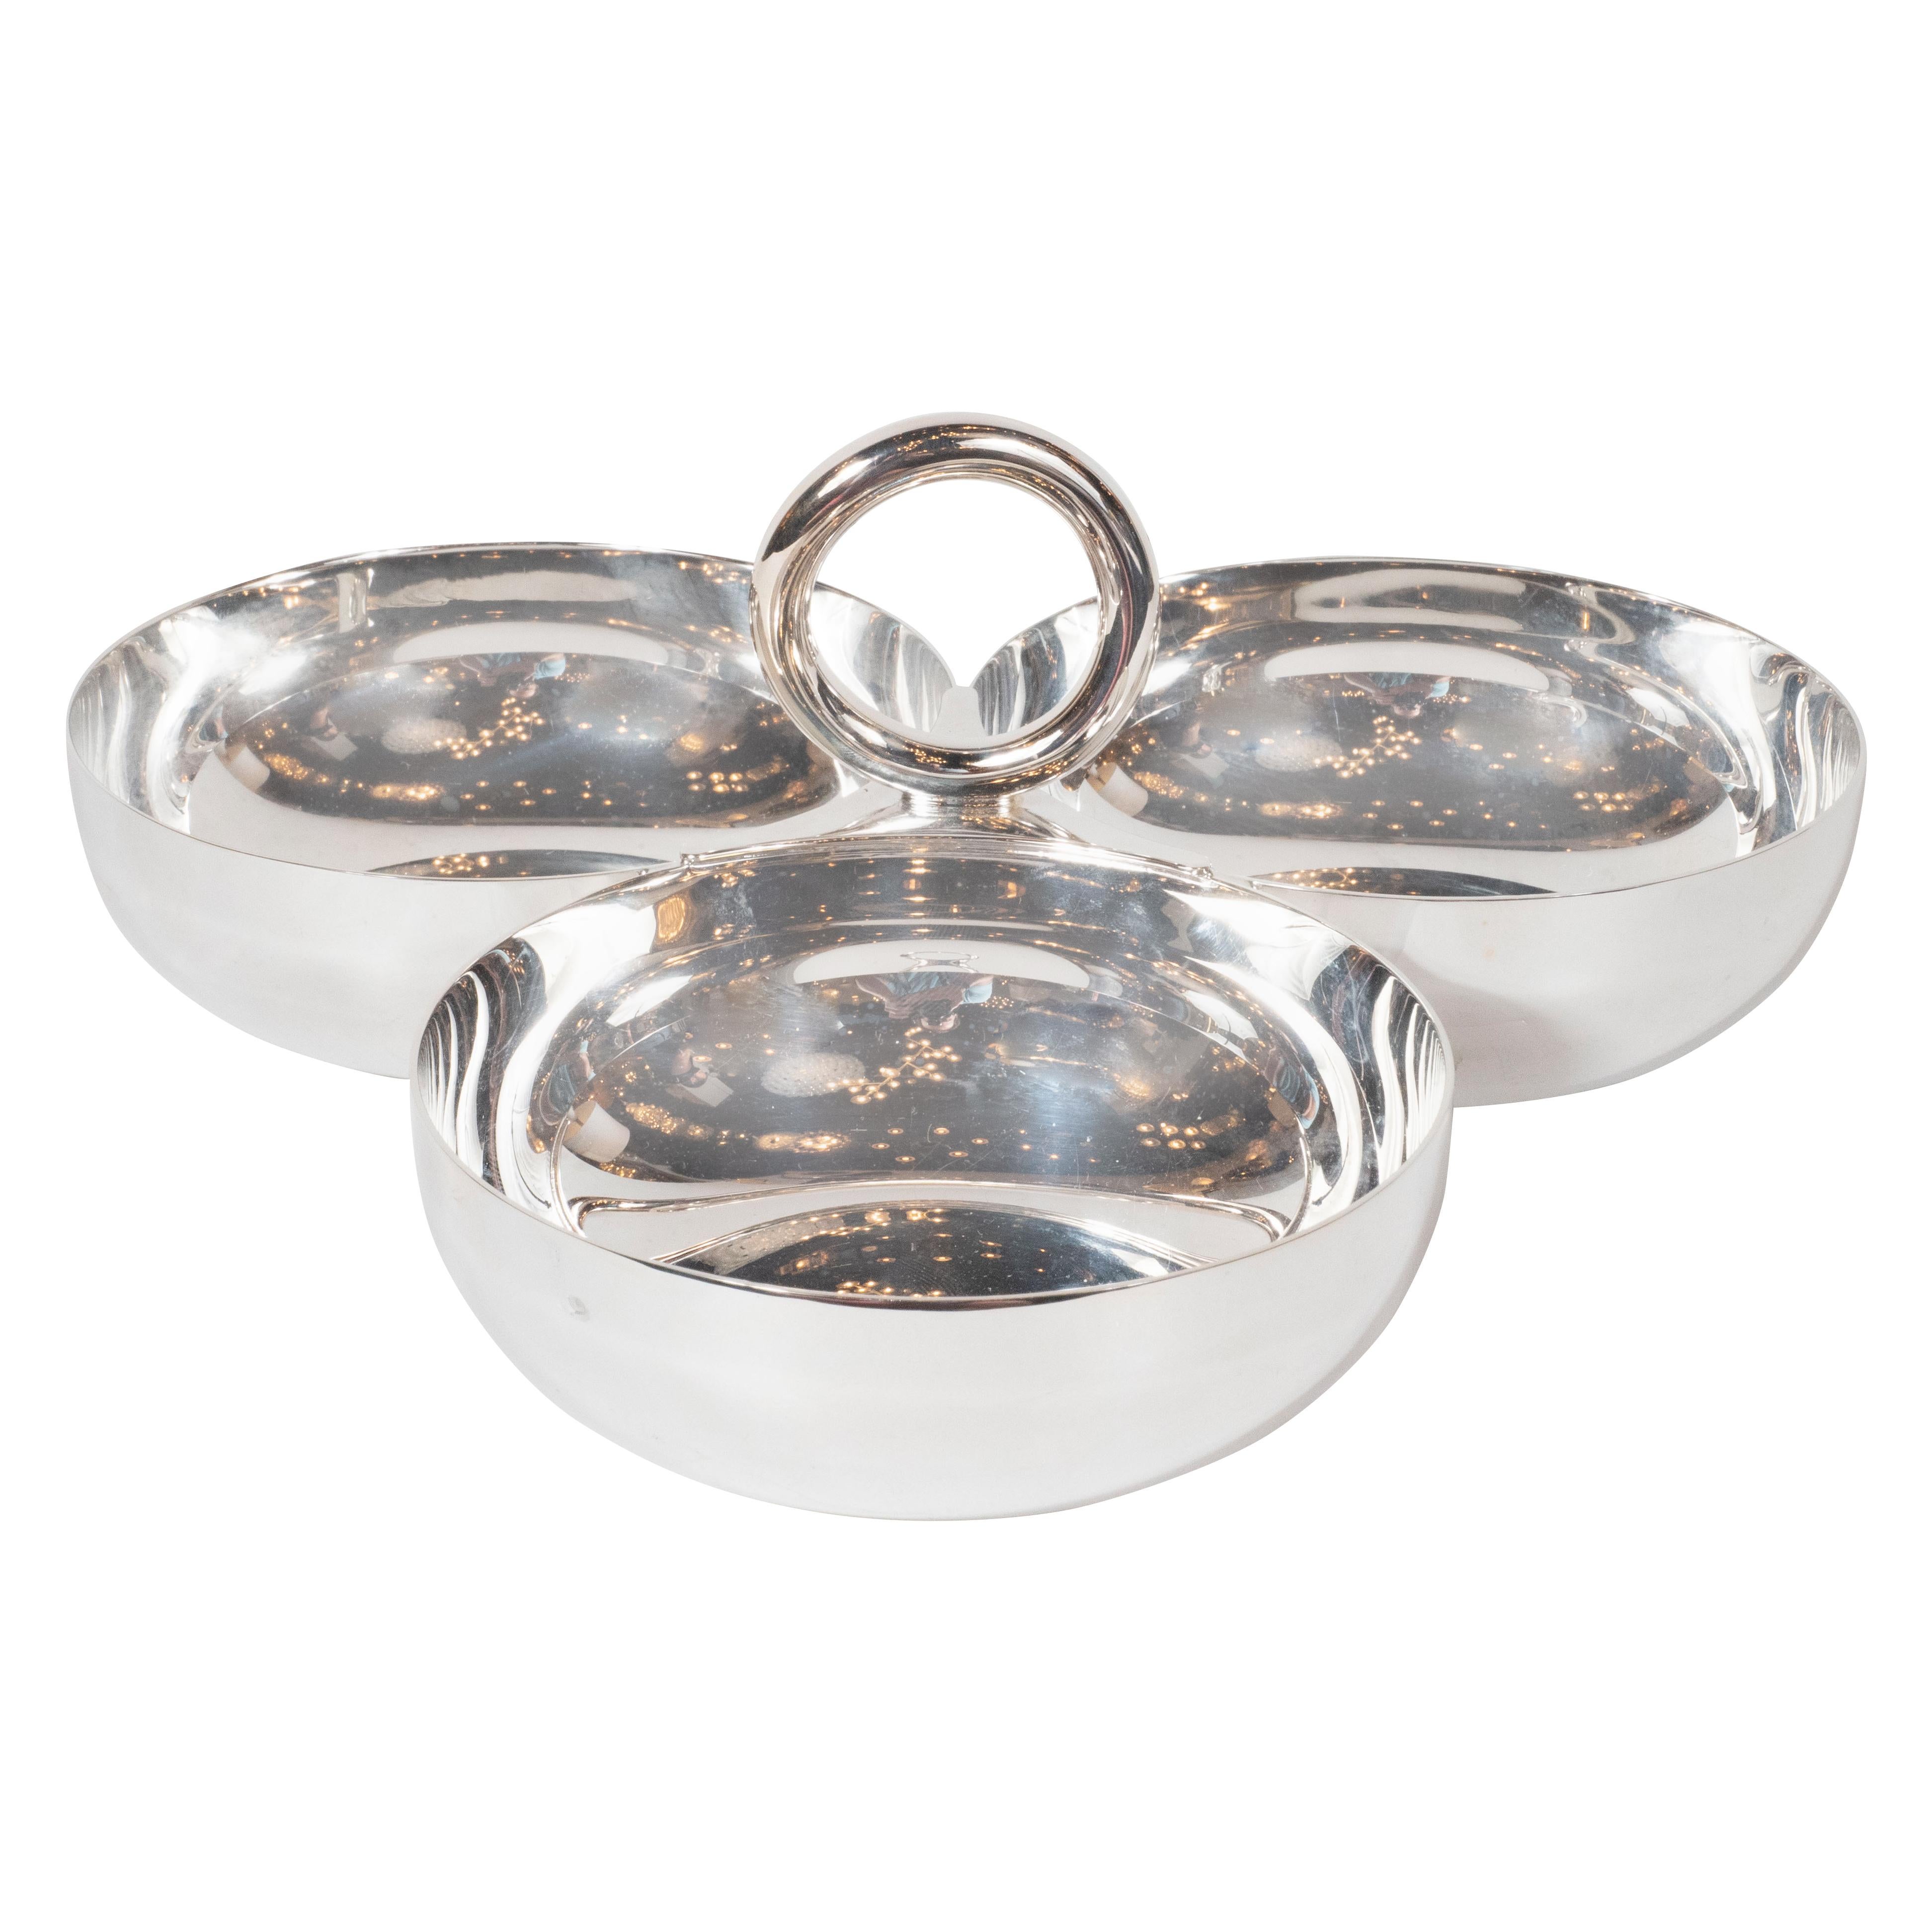 This elegant modernist silver plated hors d'ouevres dish- perfect for presenting olives, nuts or any other delicacy- was realized by Christofle in France. Part of their Vertigo Pattern series, the piece offers three conjoined circular dishes with